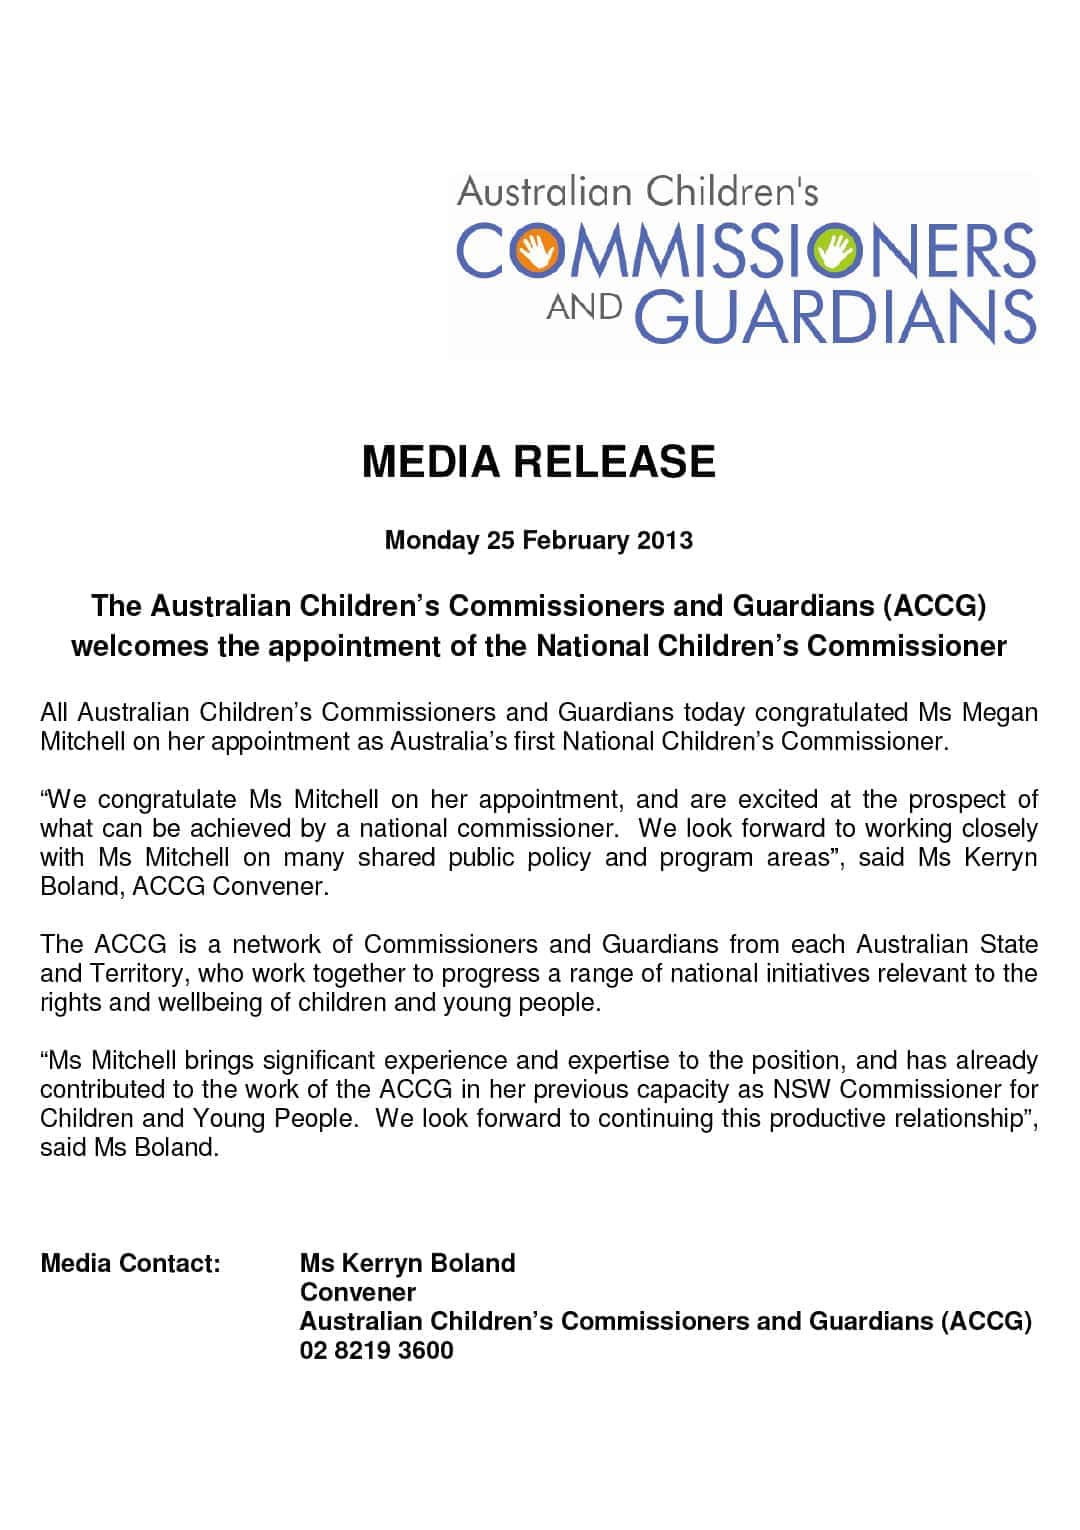 ACCG Media Release – ACCG welcomes the appointment of the National Children's Commissioner